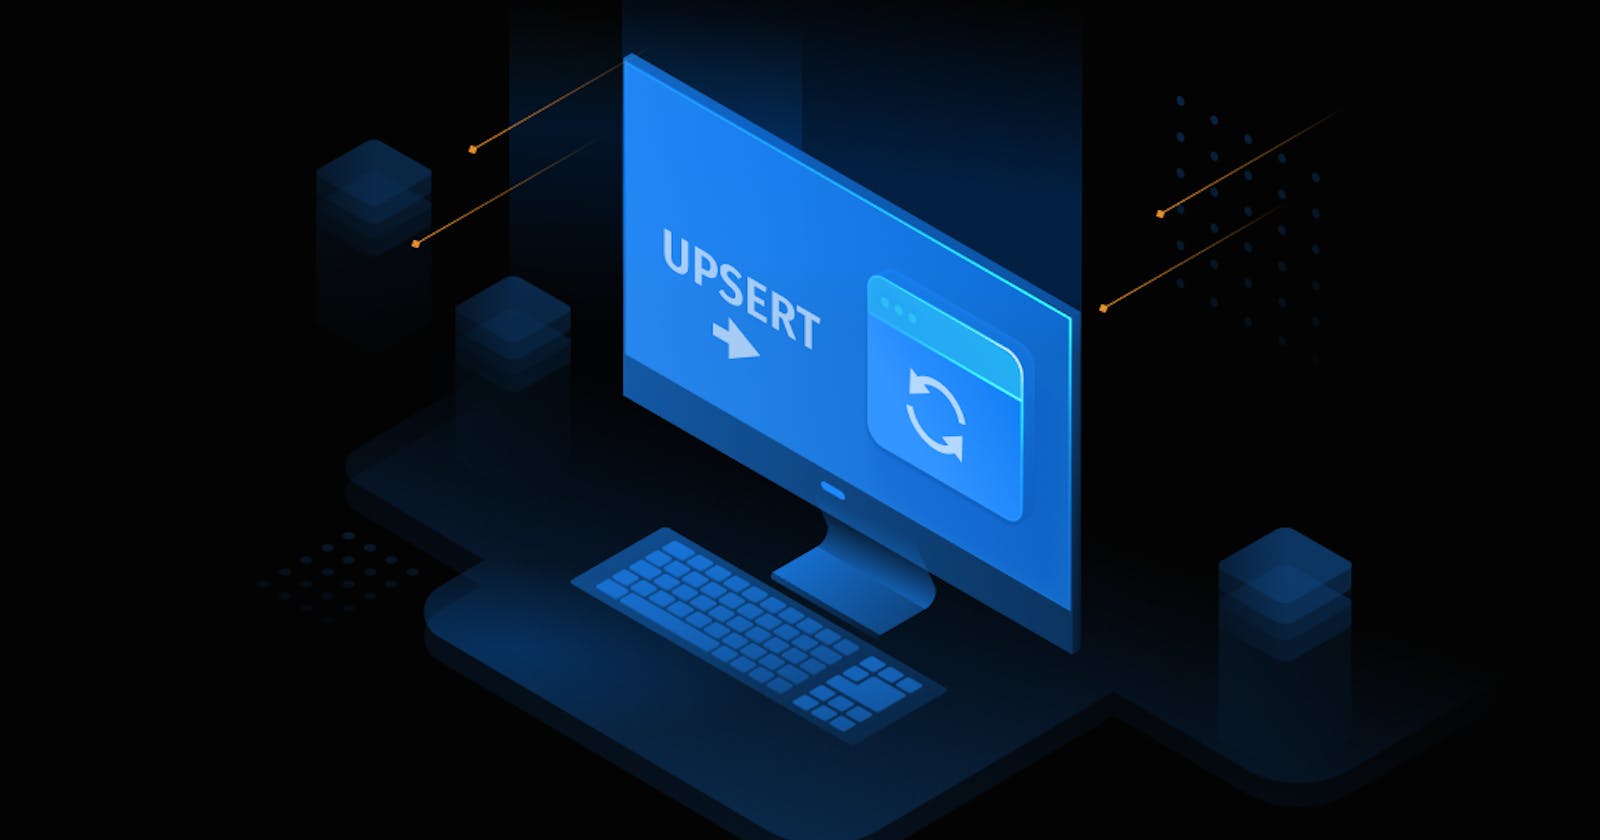 MySQL UPSERT: Comprehensive Examples and Use Cases